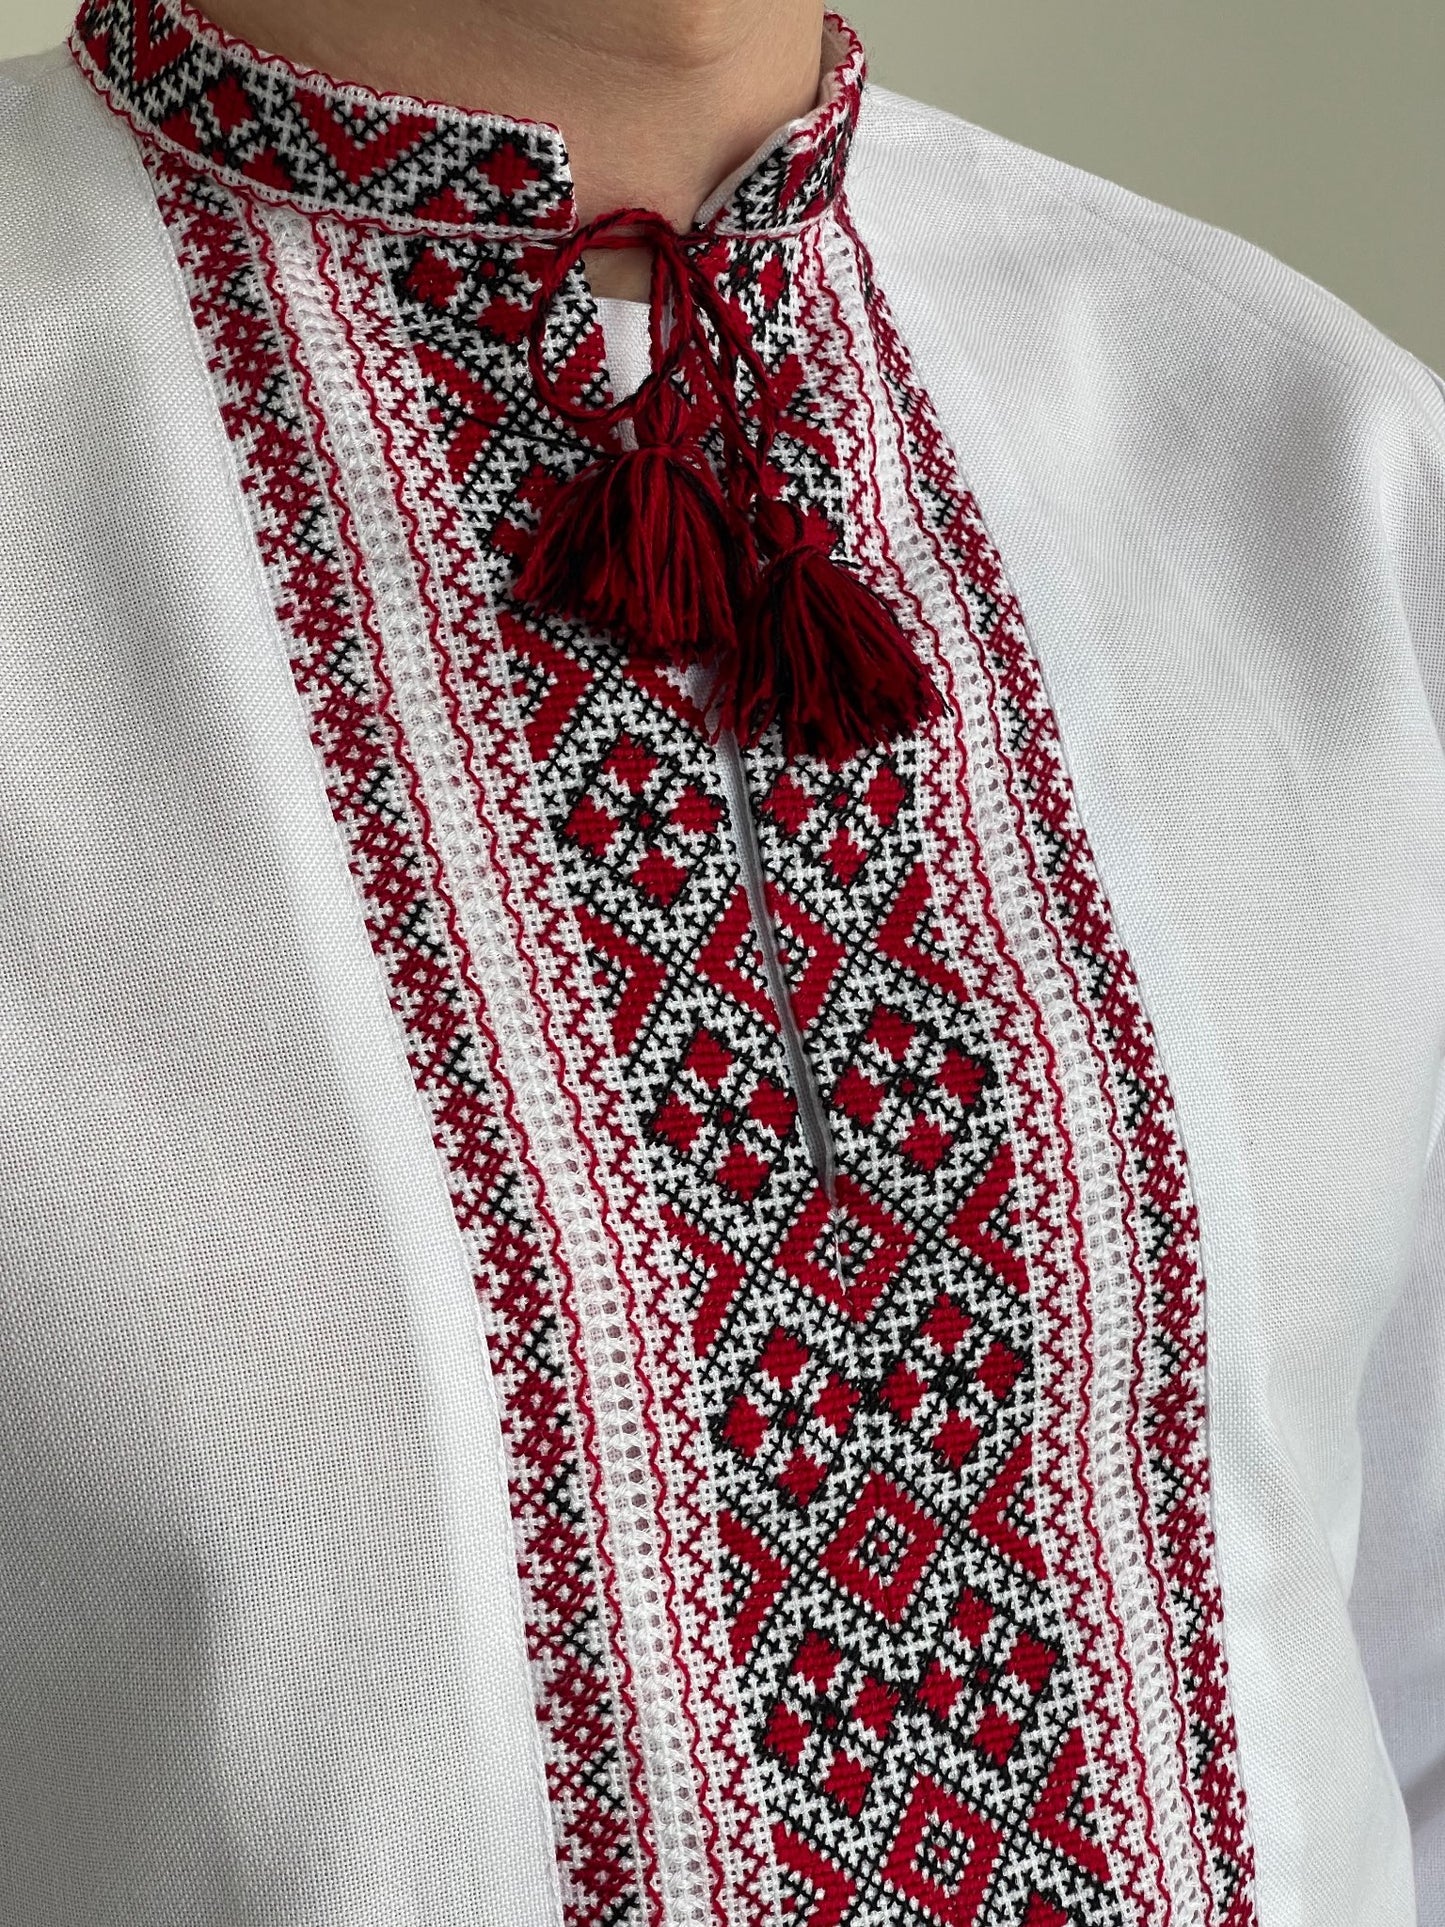  View details for Men's Vyshyvanka with Red and Black Hand Embroidery Men's Vyshyvanka with Red and Black Hand Embroidery (Чоловіча Вишиванка)